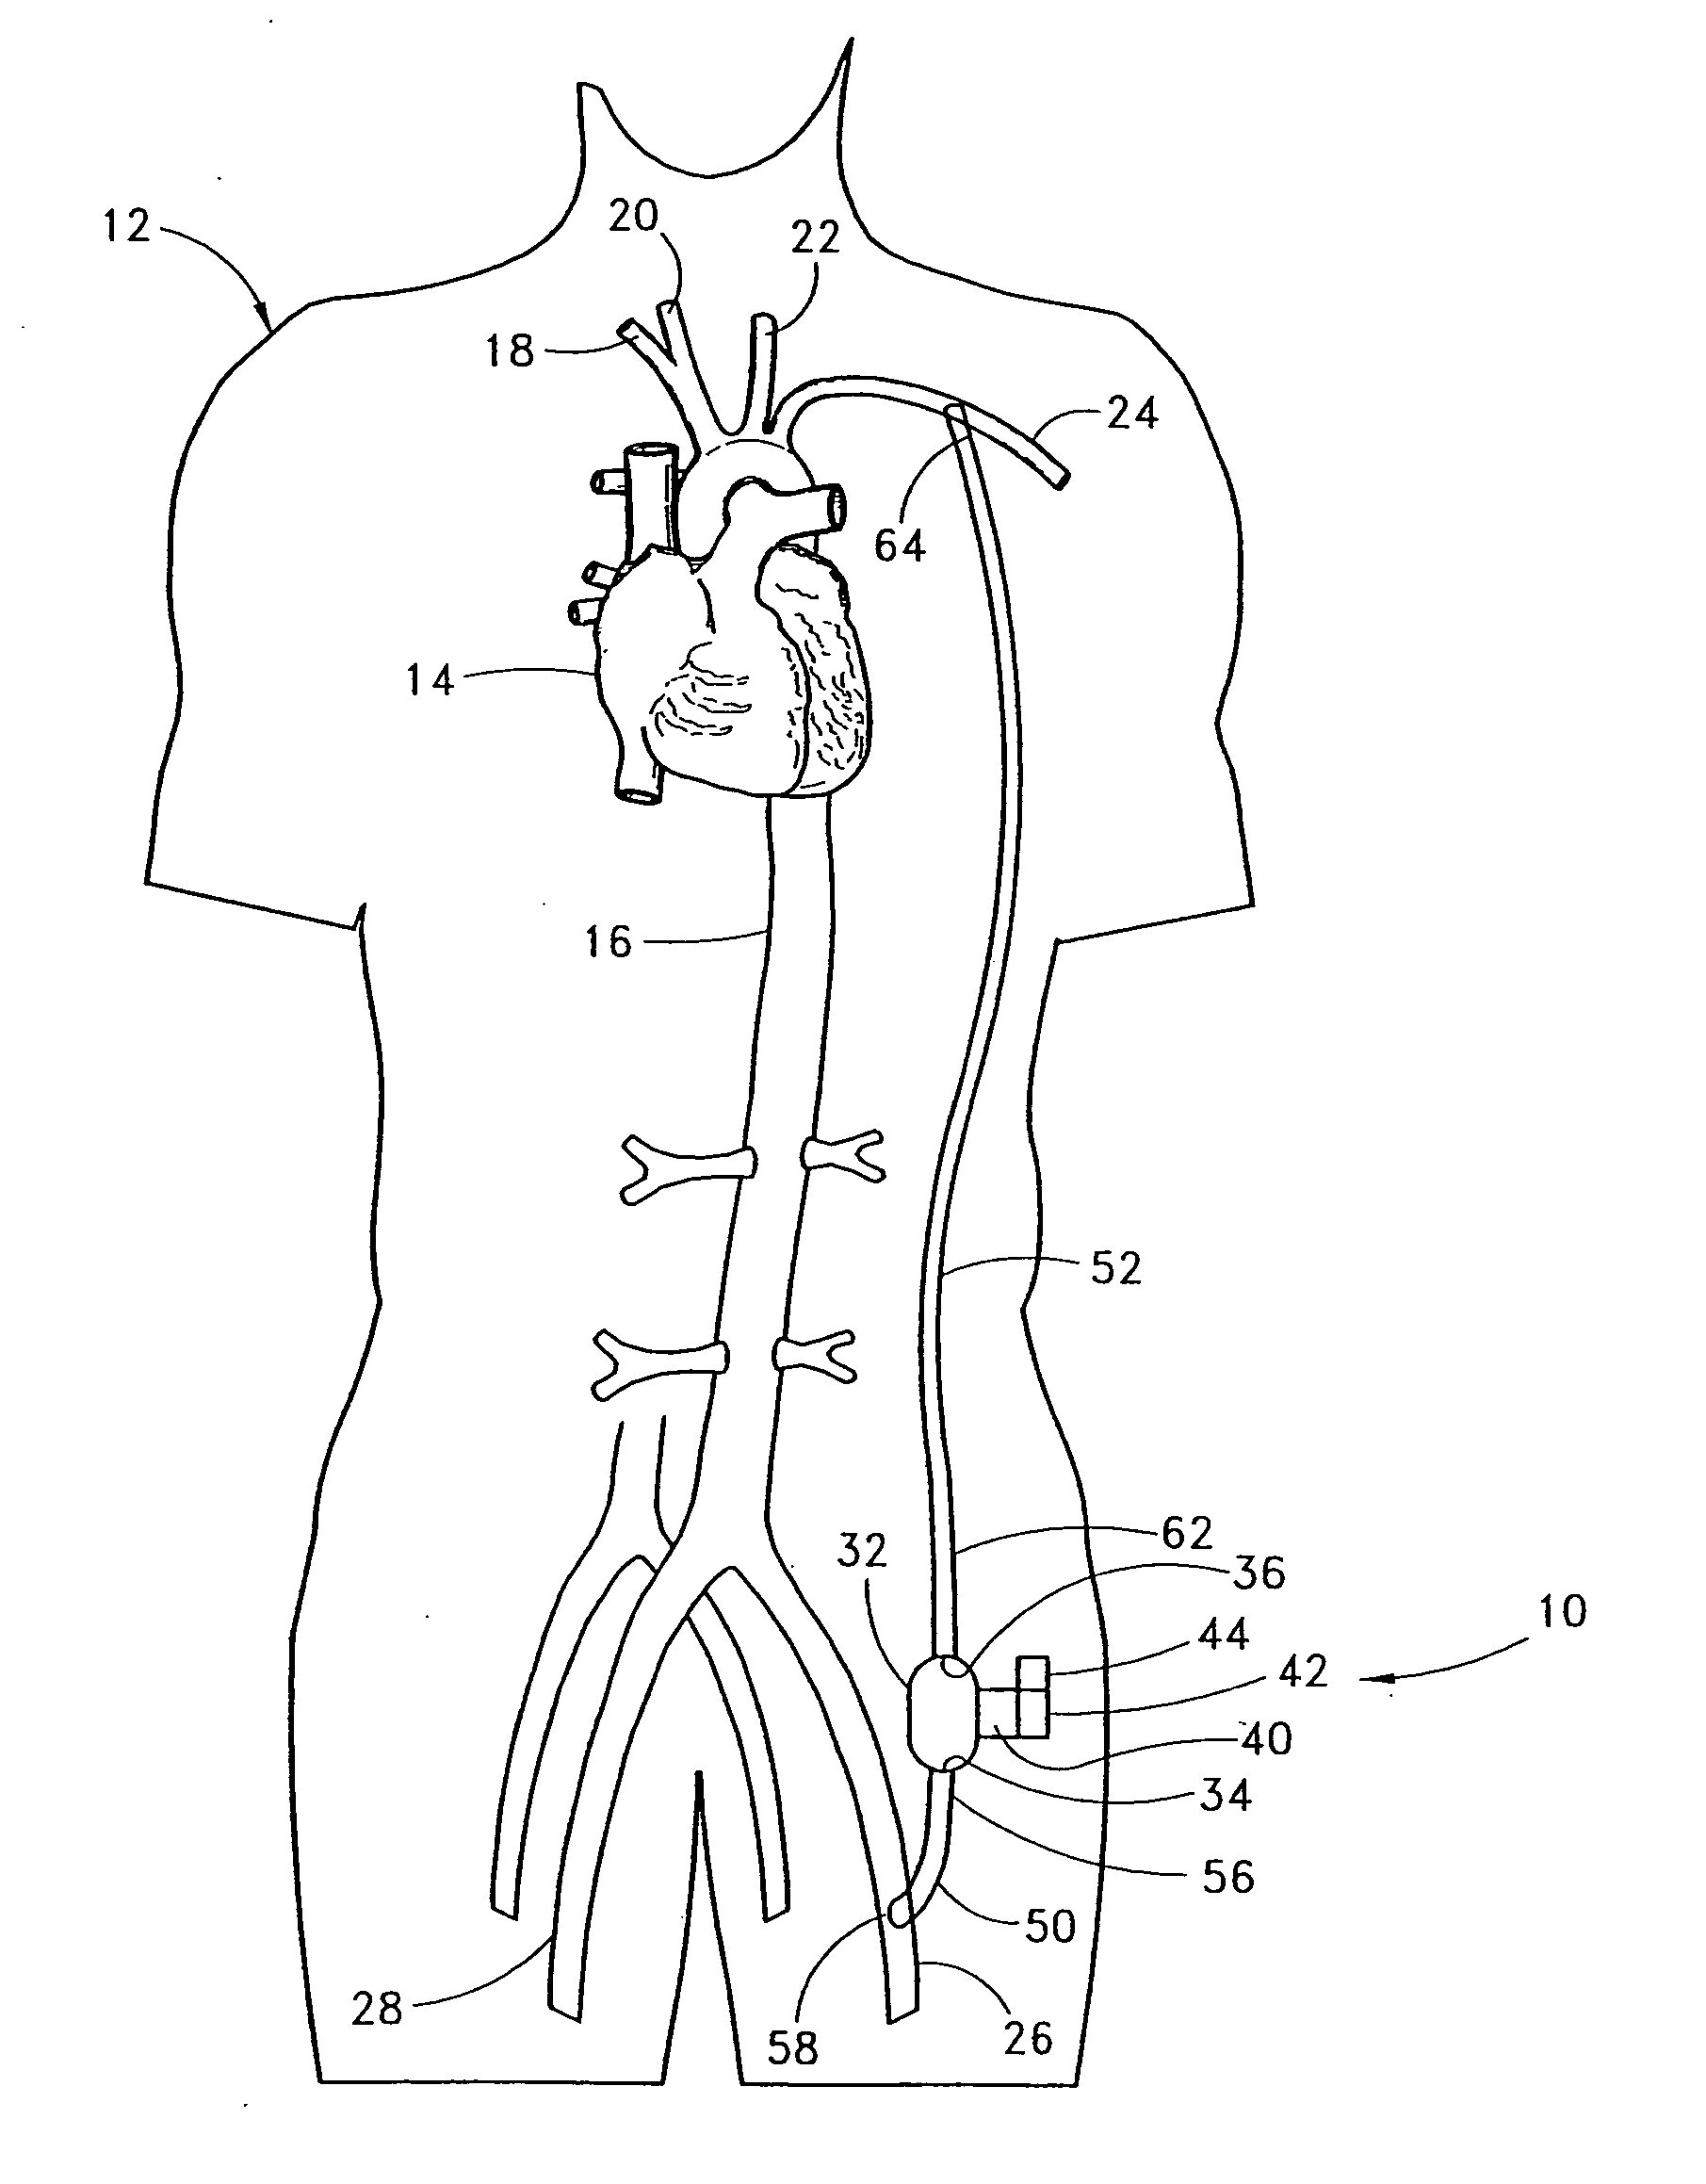 Implantable heart assist system and method of applying same